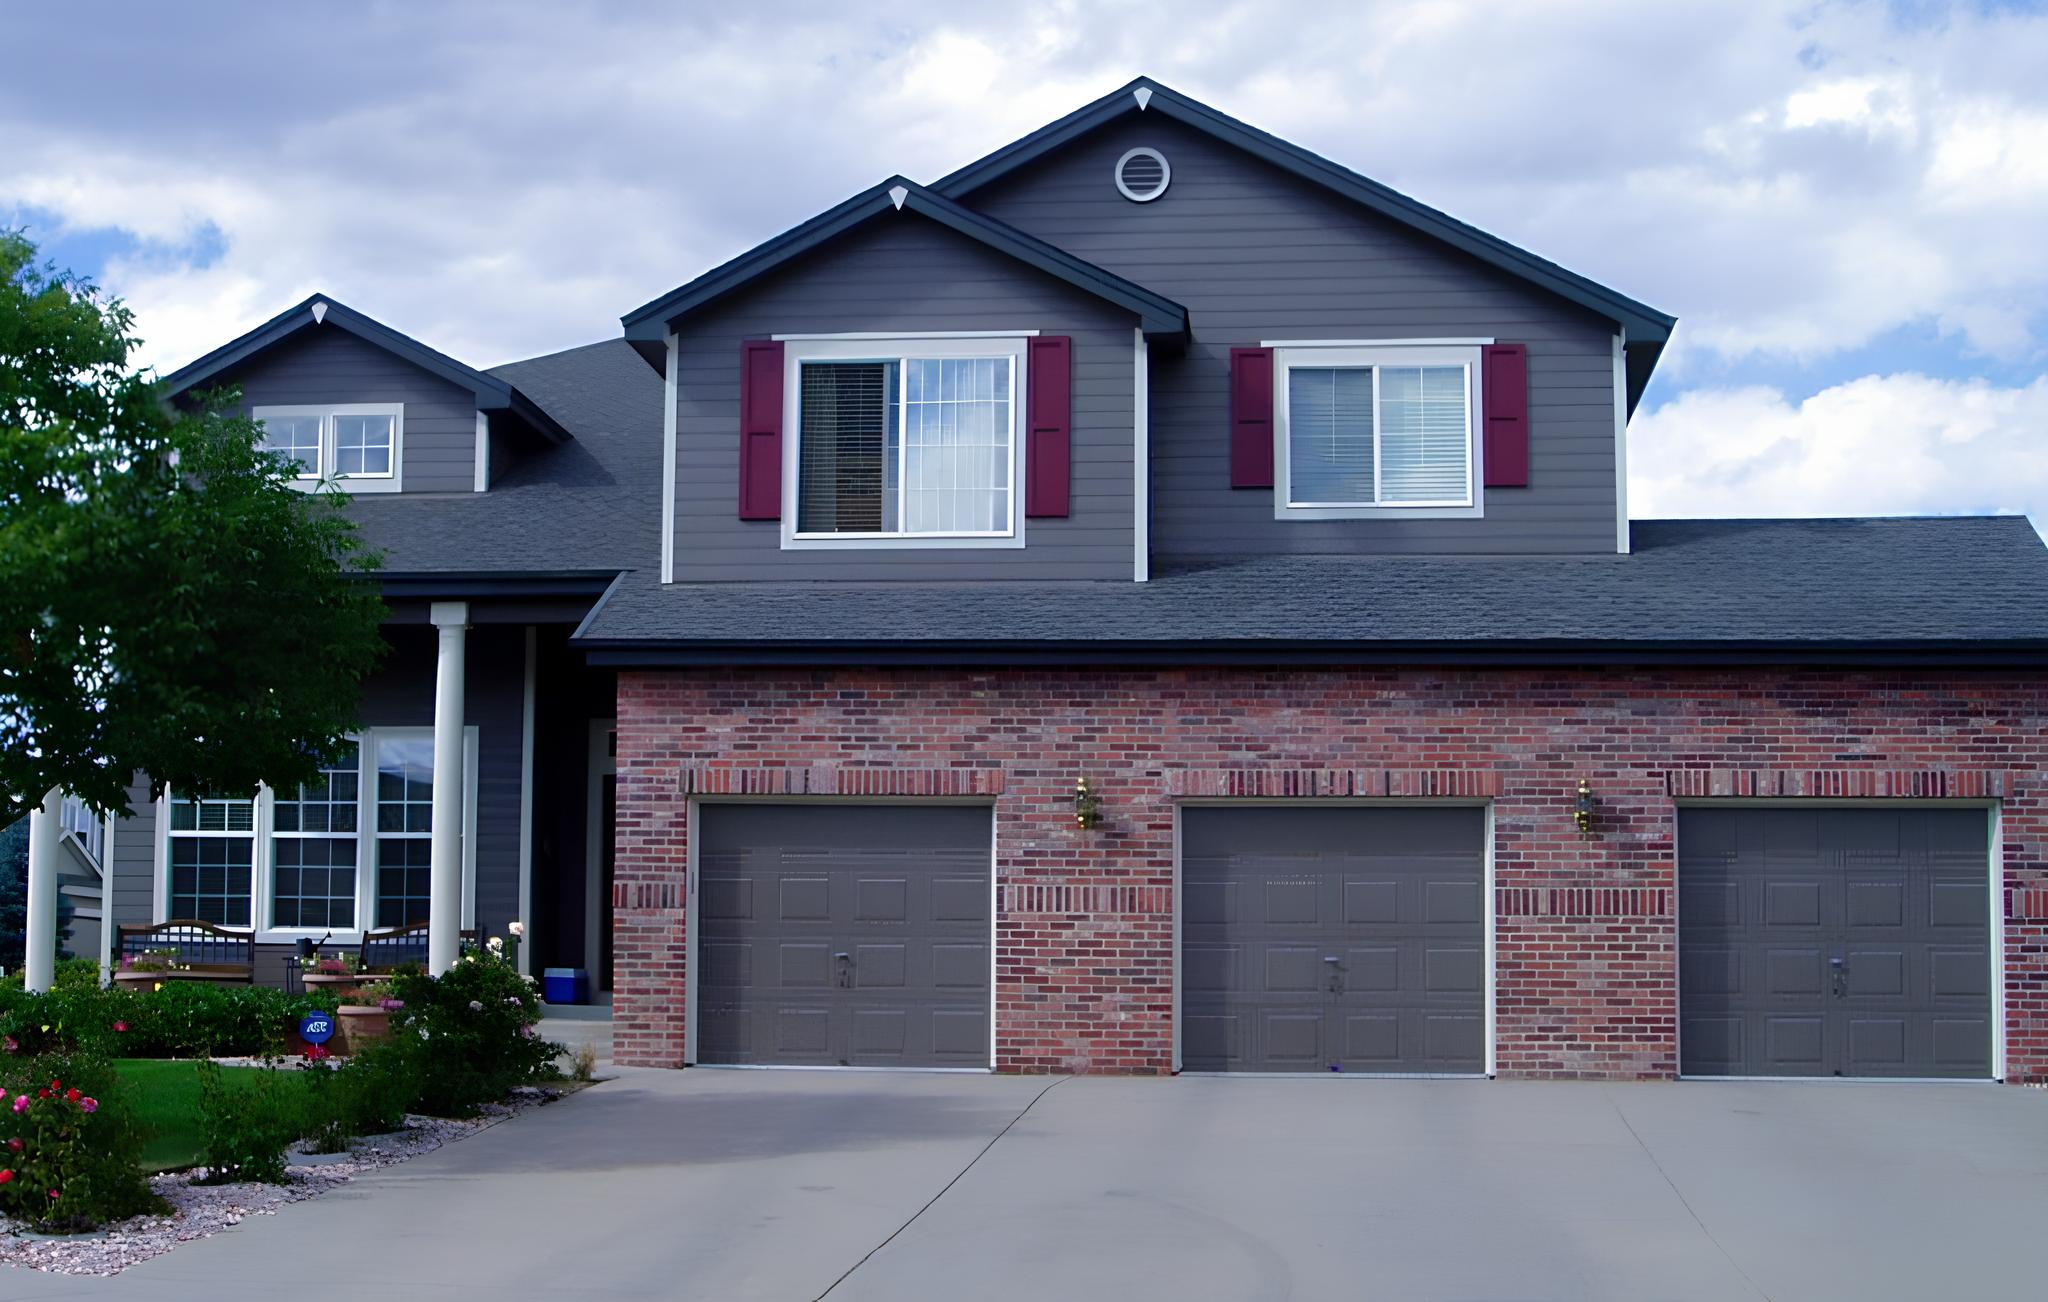 Multi-Story Home Repaint in Arvada, CO After